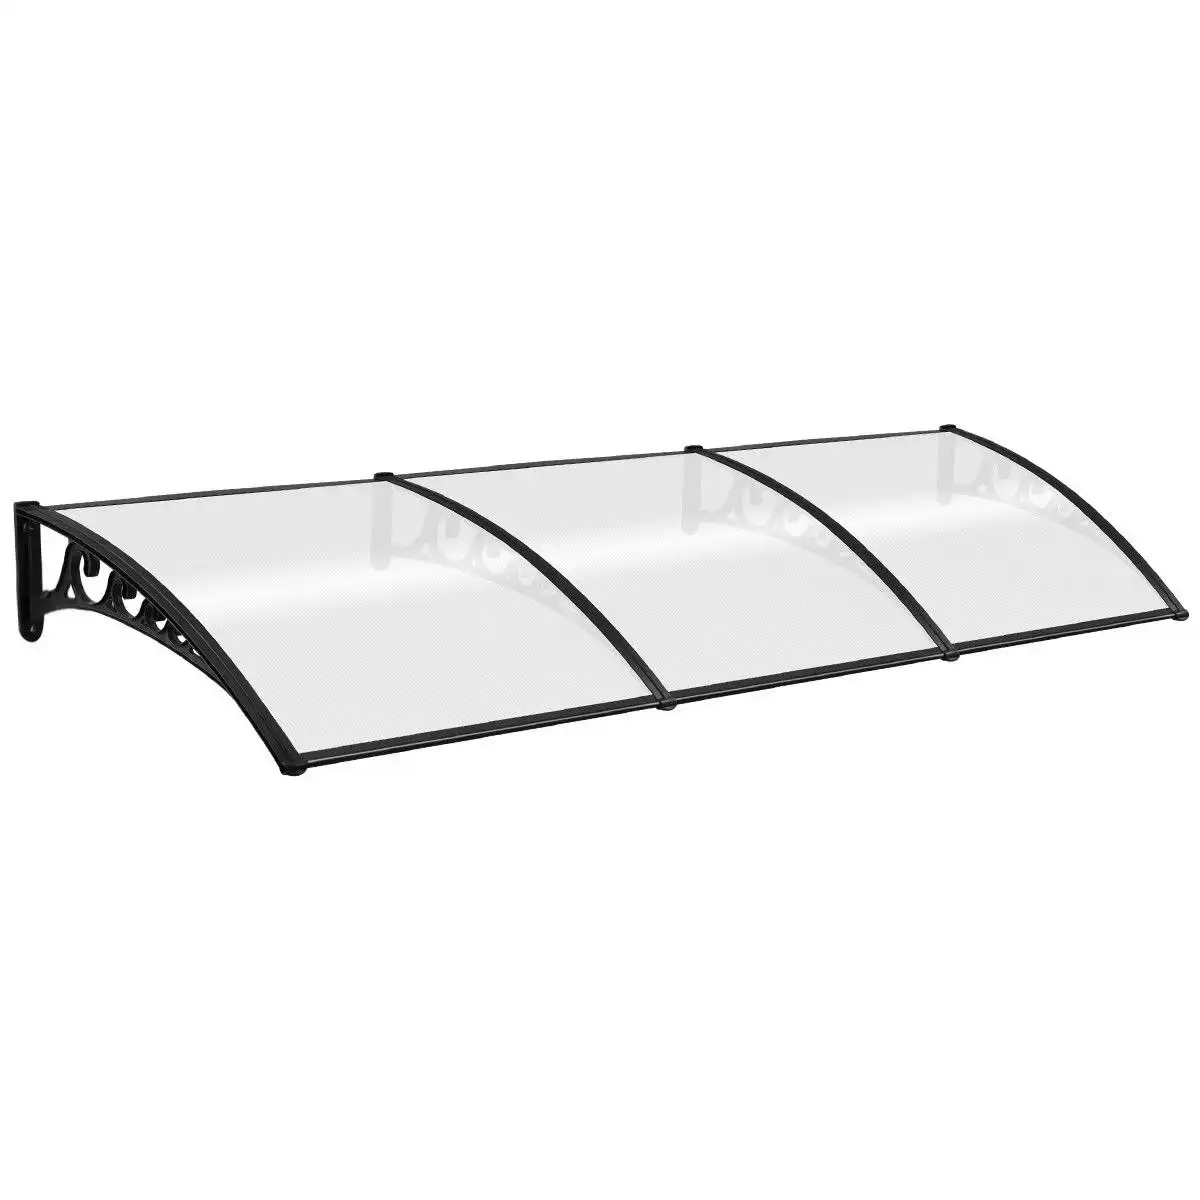 Ausway Crystal Clear Rain Proof Shade Rain Cover Canopy Awning  3M